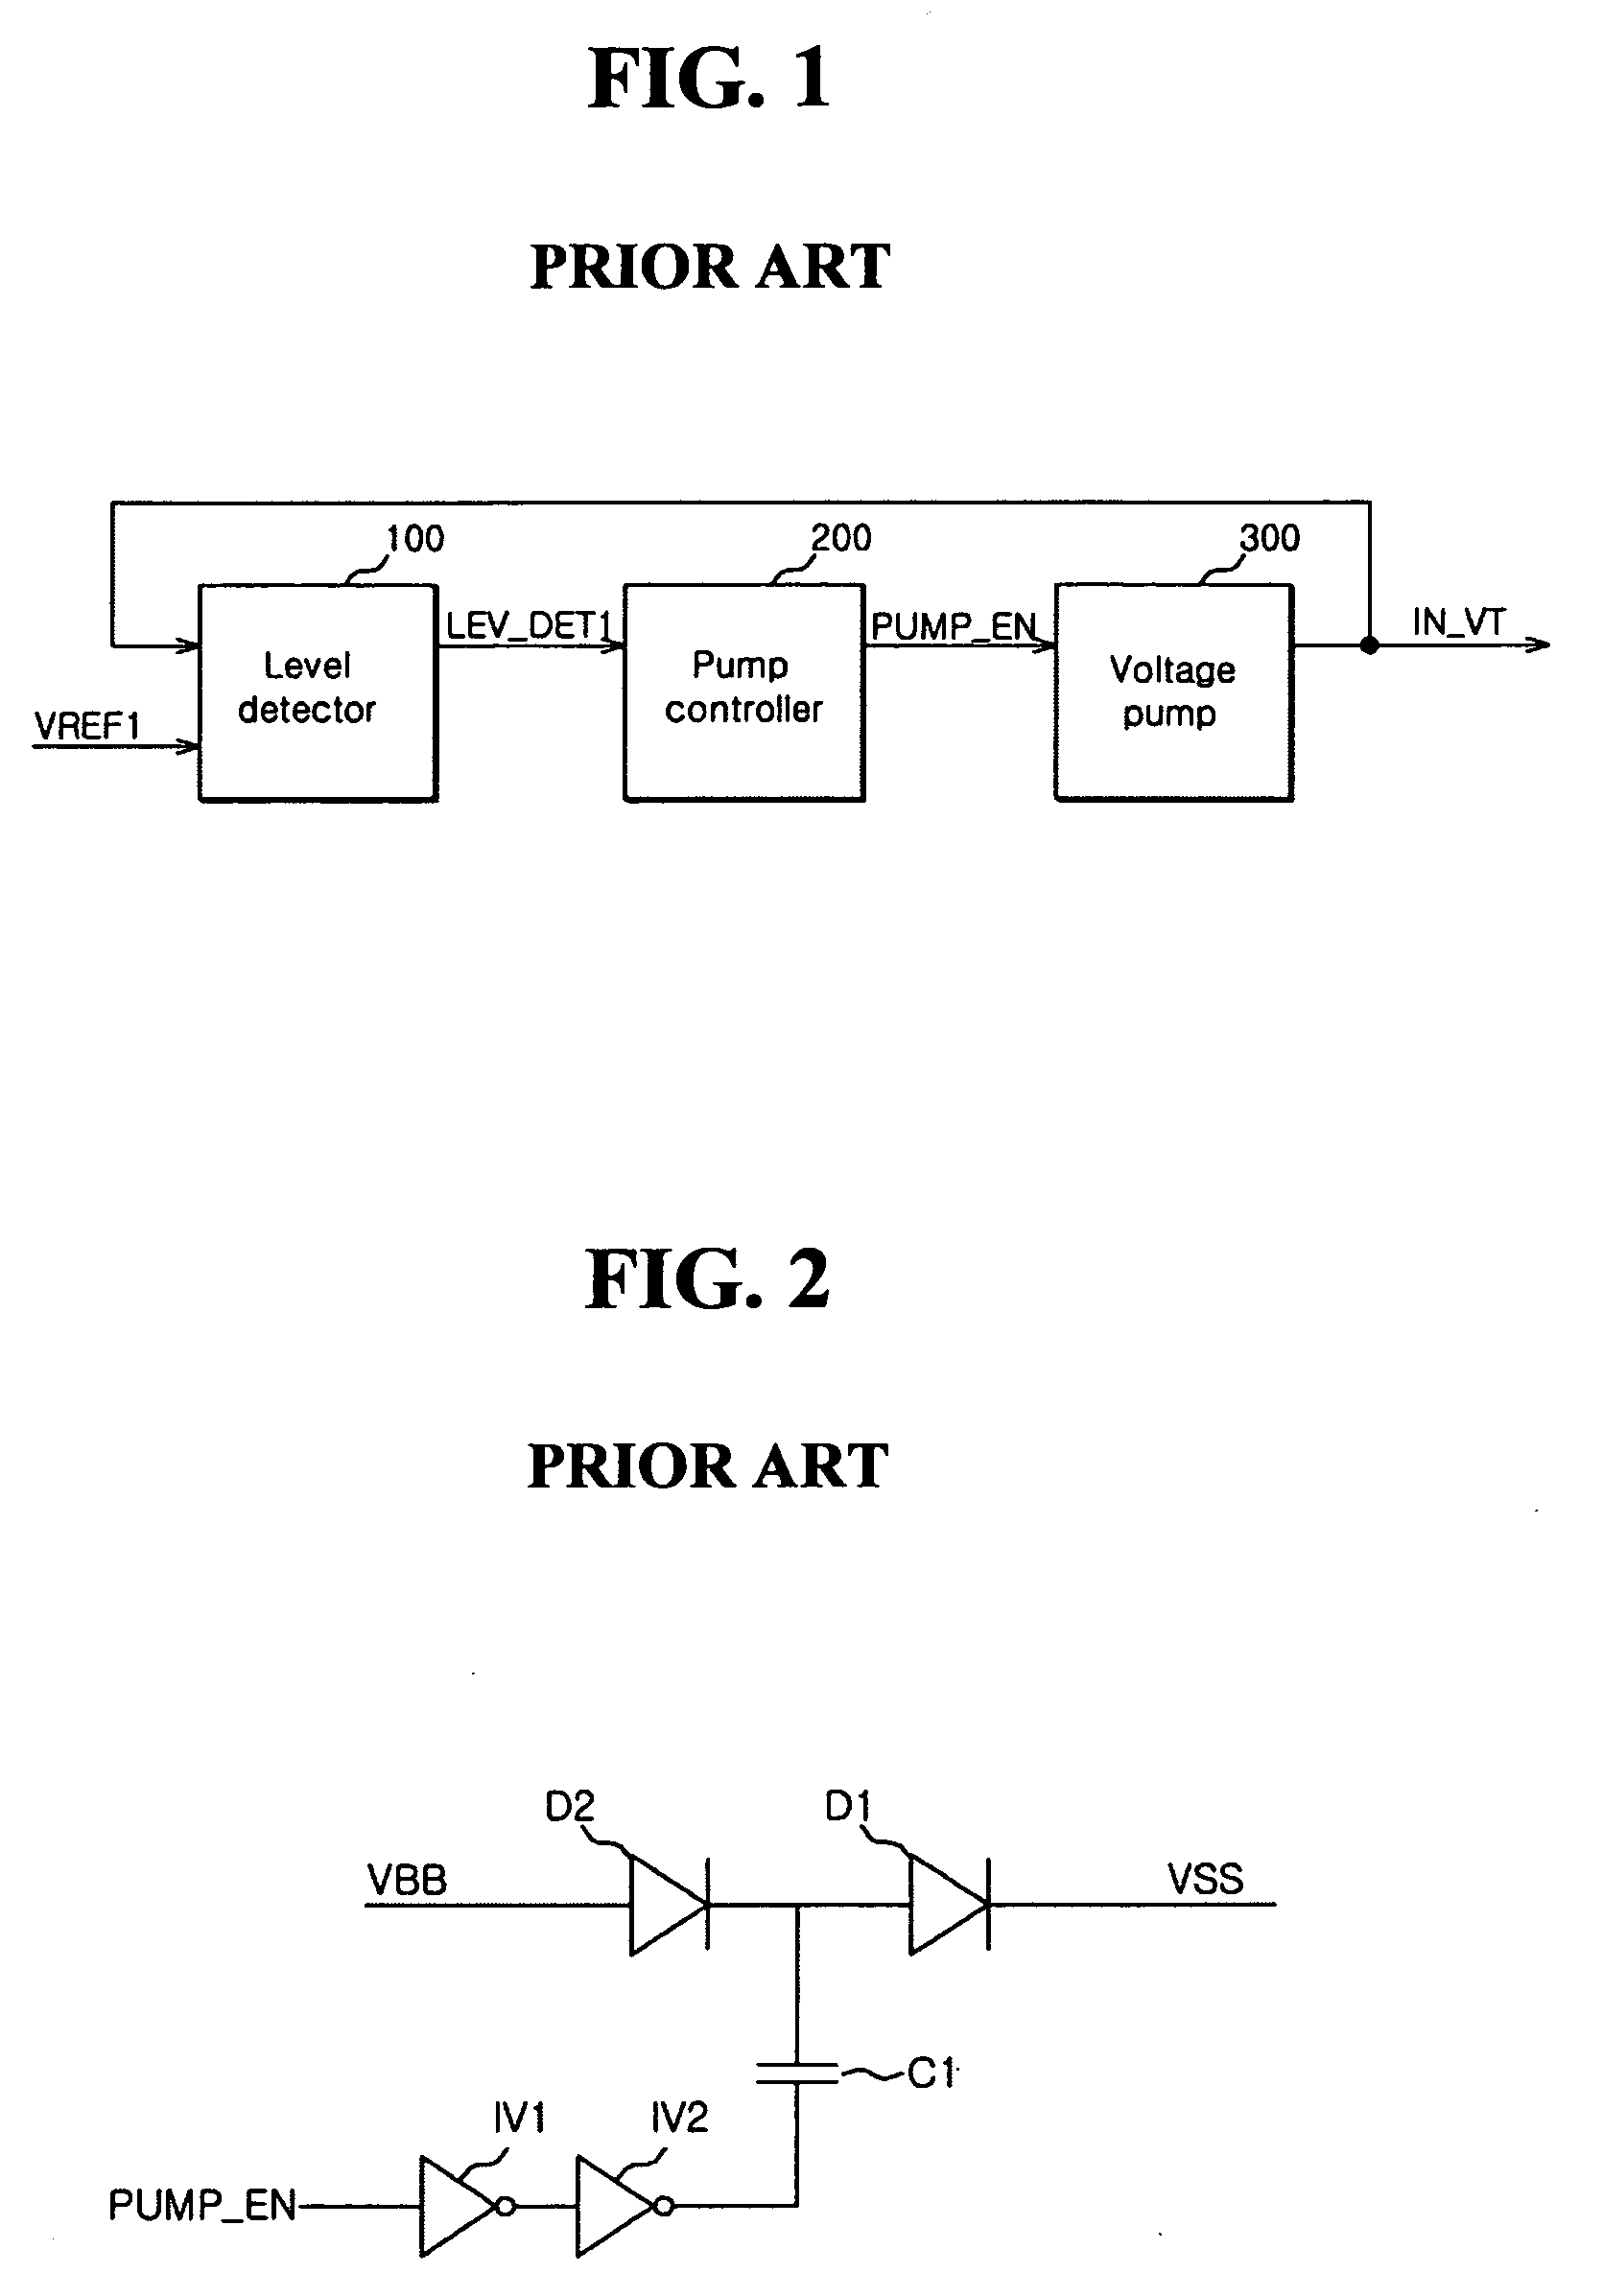 Internal voltage generator for semiconductor integrated circuit capable of compensating for change in voltage level